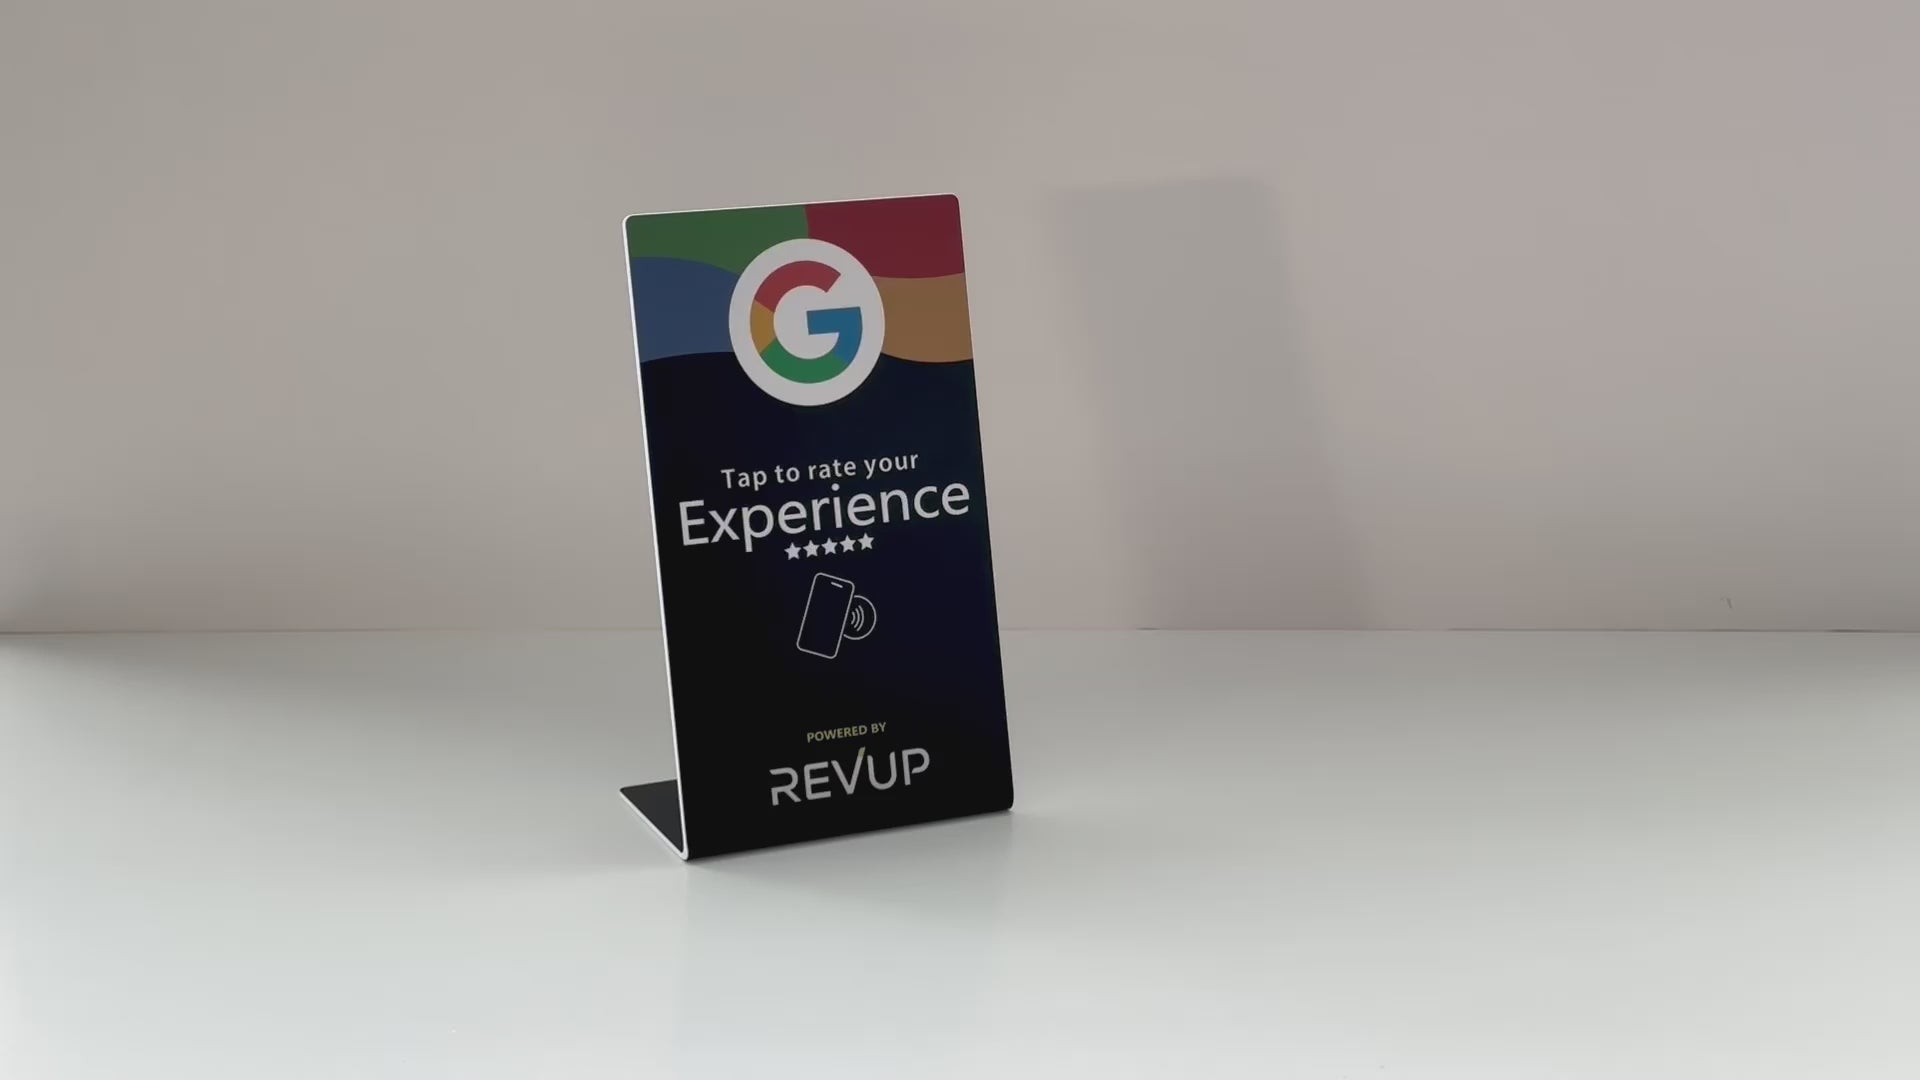 Load video: Revup Review Stand Demo: Tap Phone to Instantly Access Google Review Page